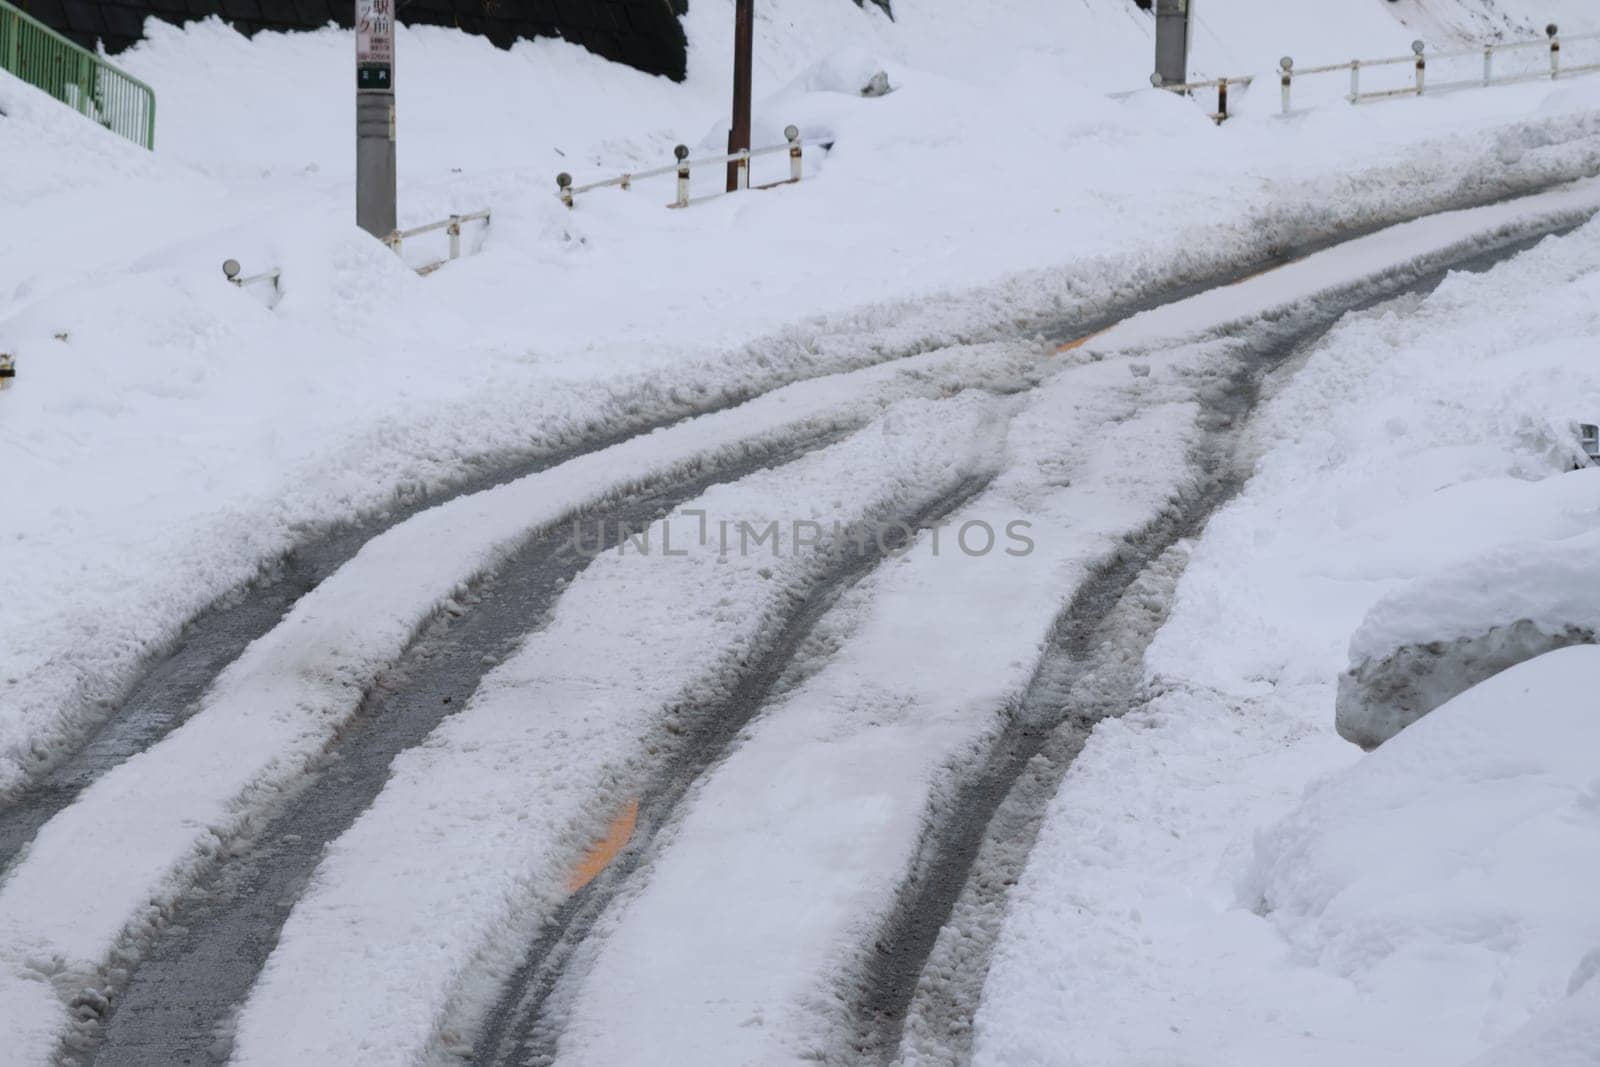 Winter scene with tire tracks on a snow-covered road, indicating recent vehicle passage.